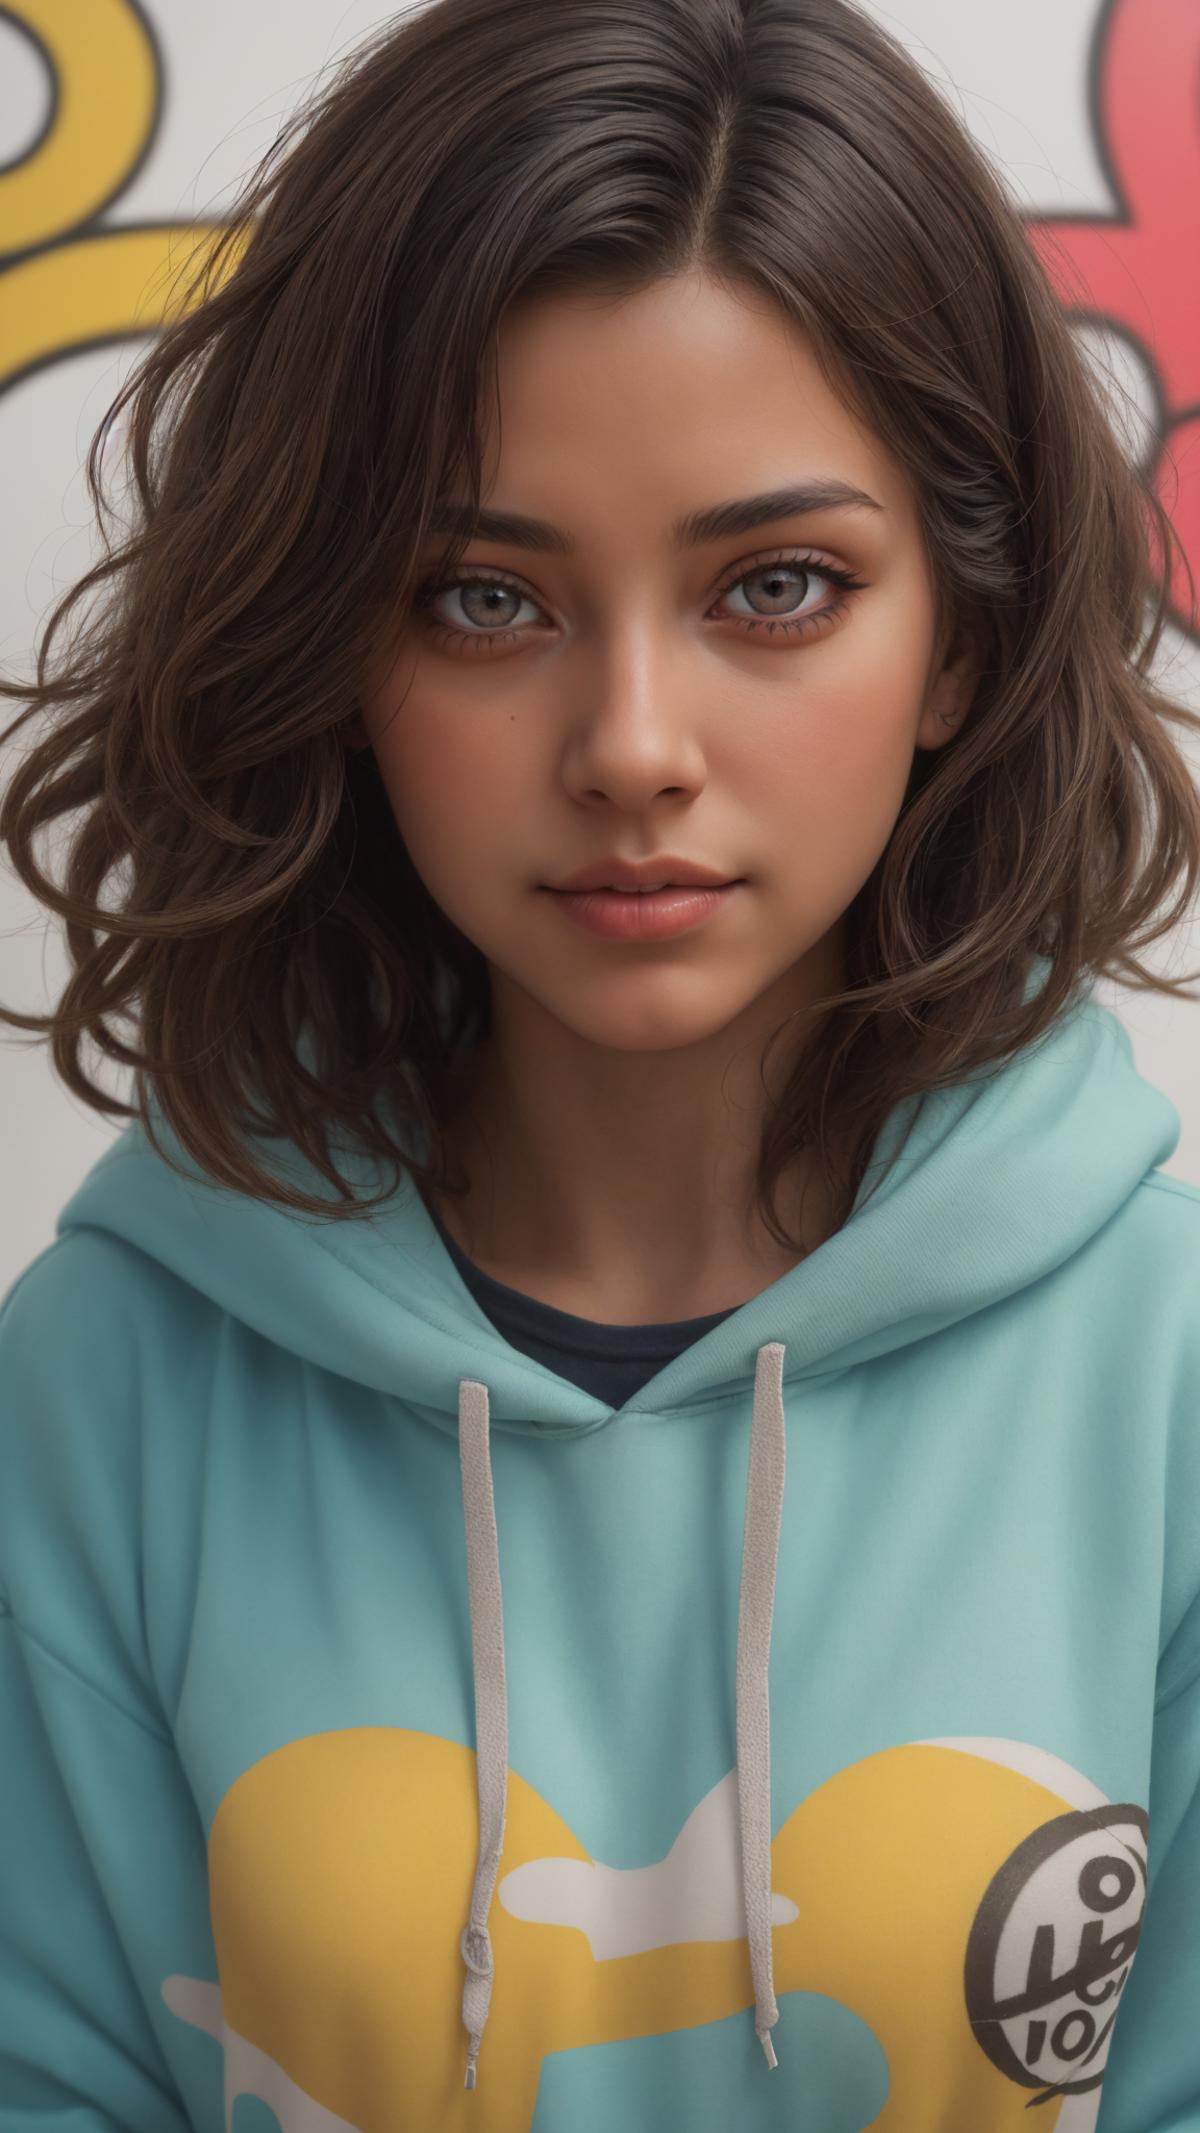 A girl with long brown hair wearing a blue hoodie.